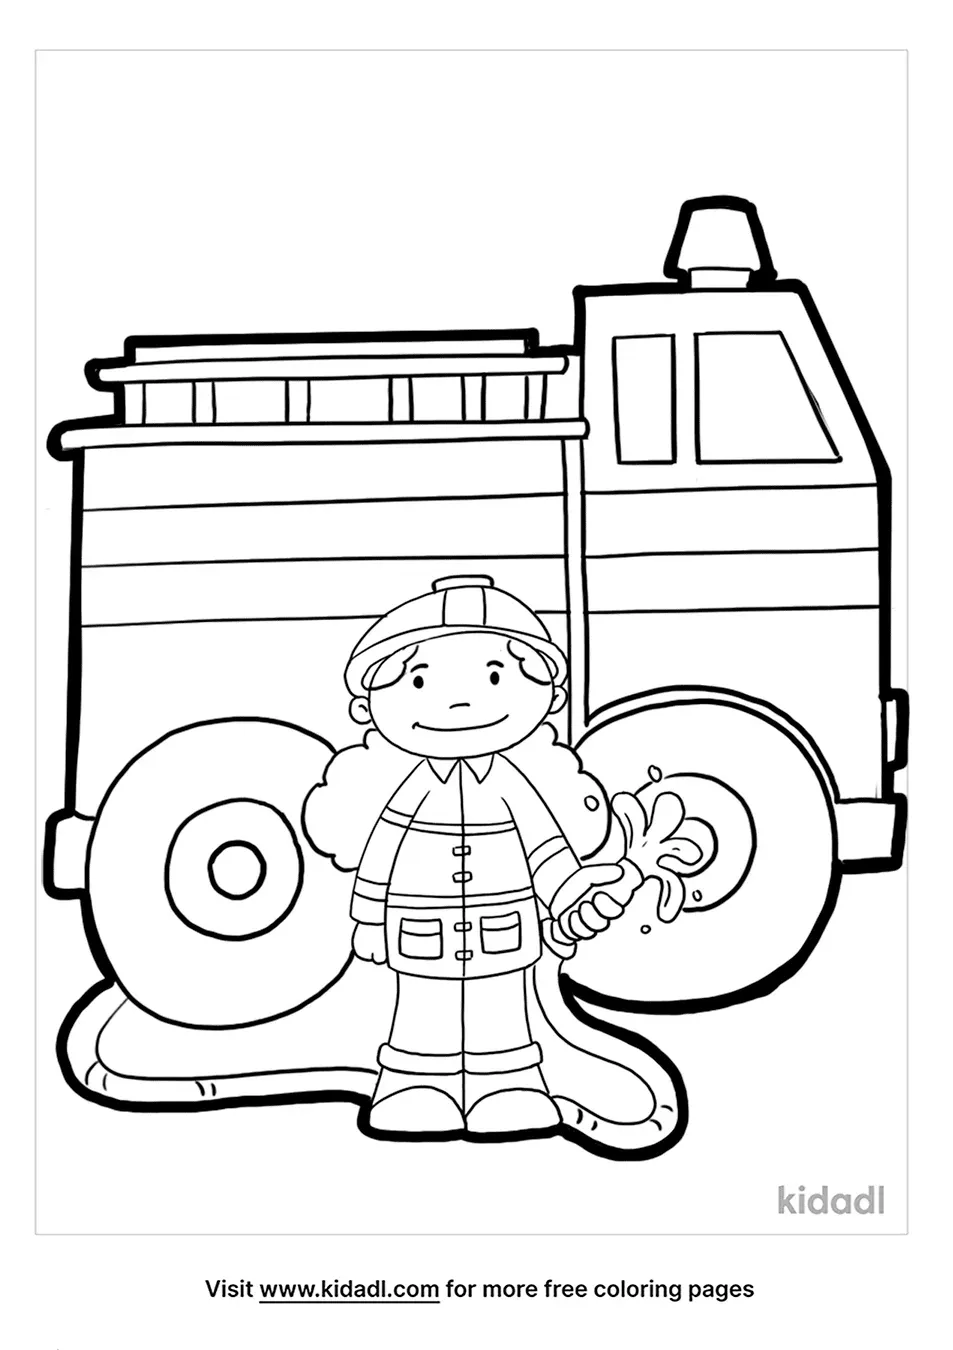 Speedometer 200 Coloring Page | Free Technology Coloring Page | Kidadl